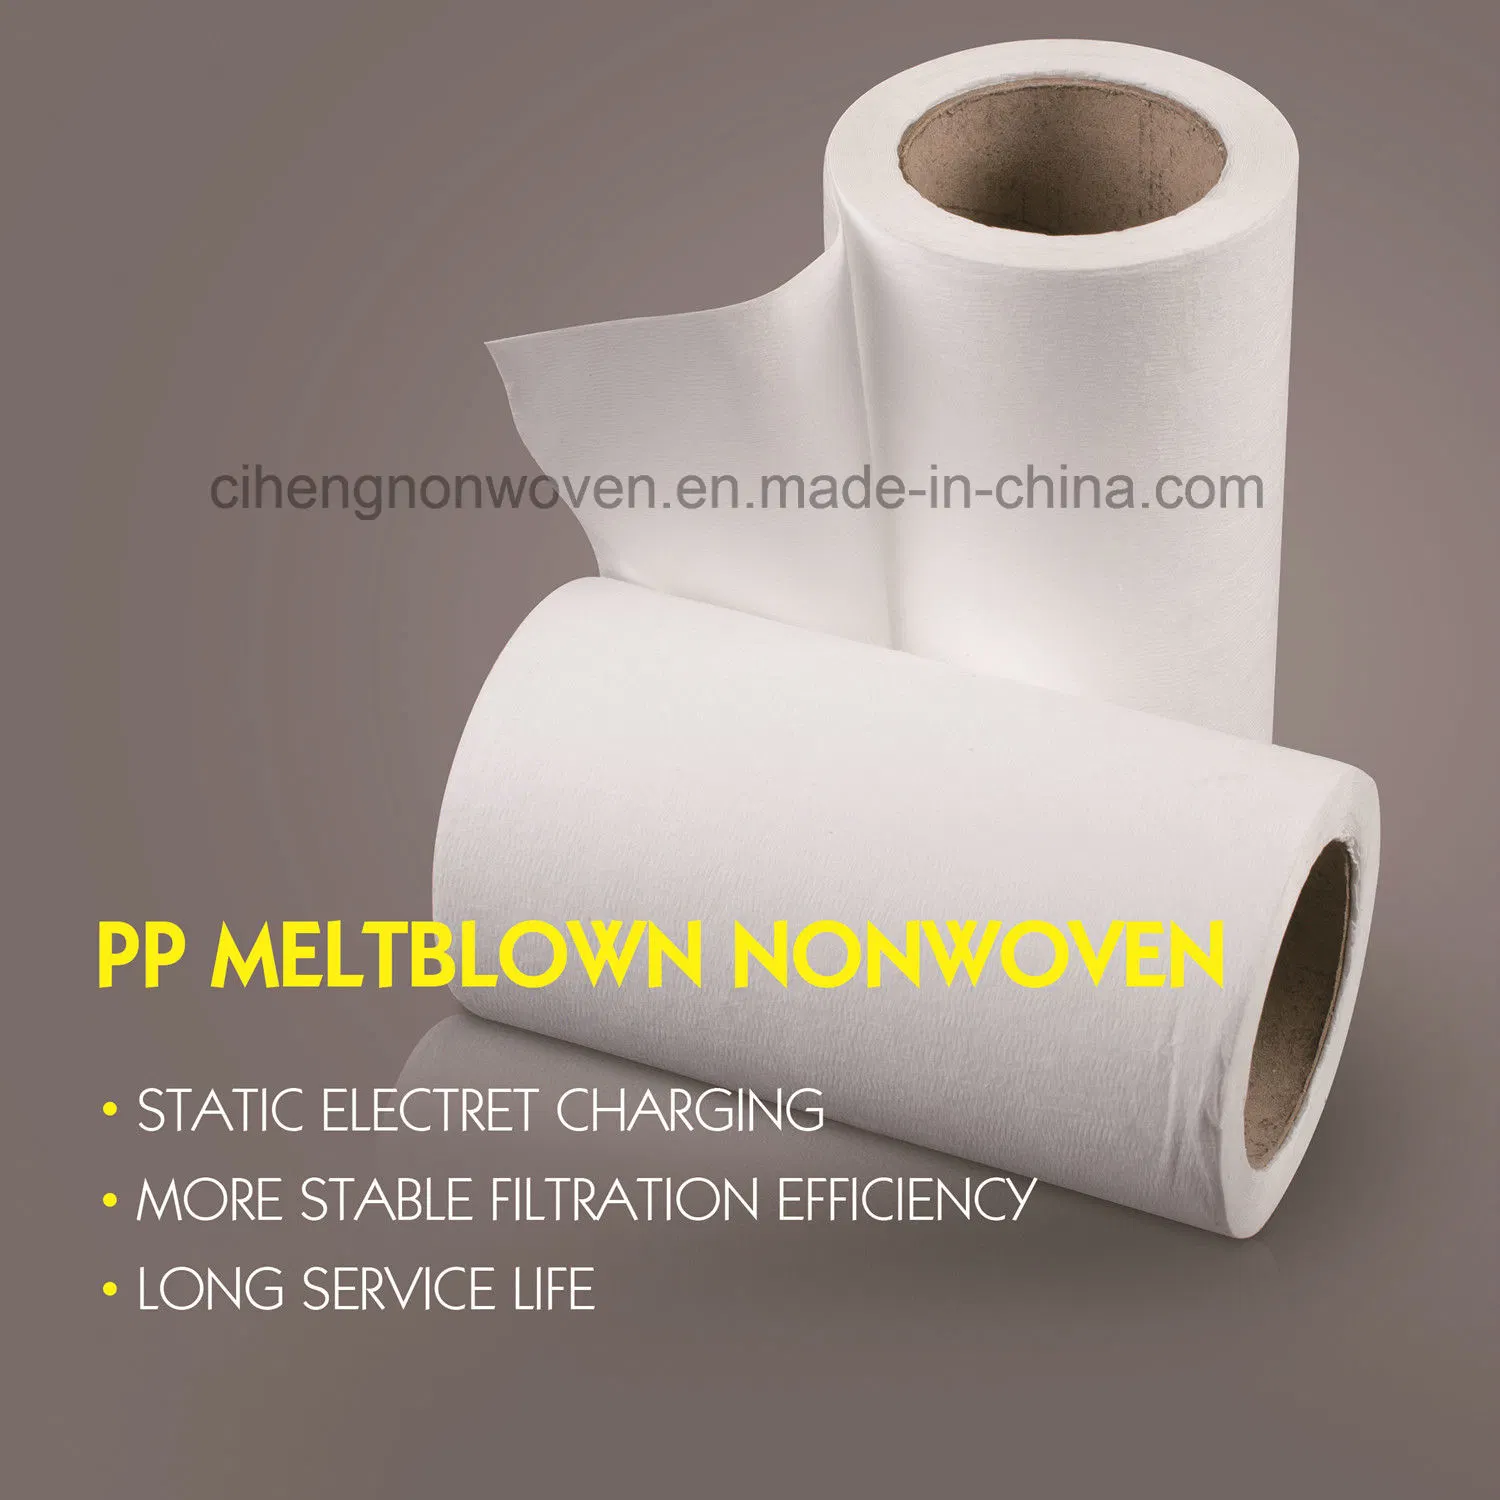 Good Nonwoven Meltblown Fabric for Mask